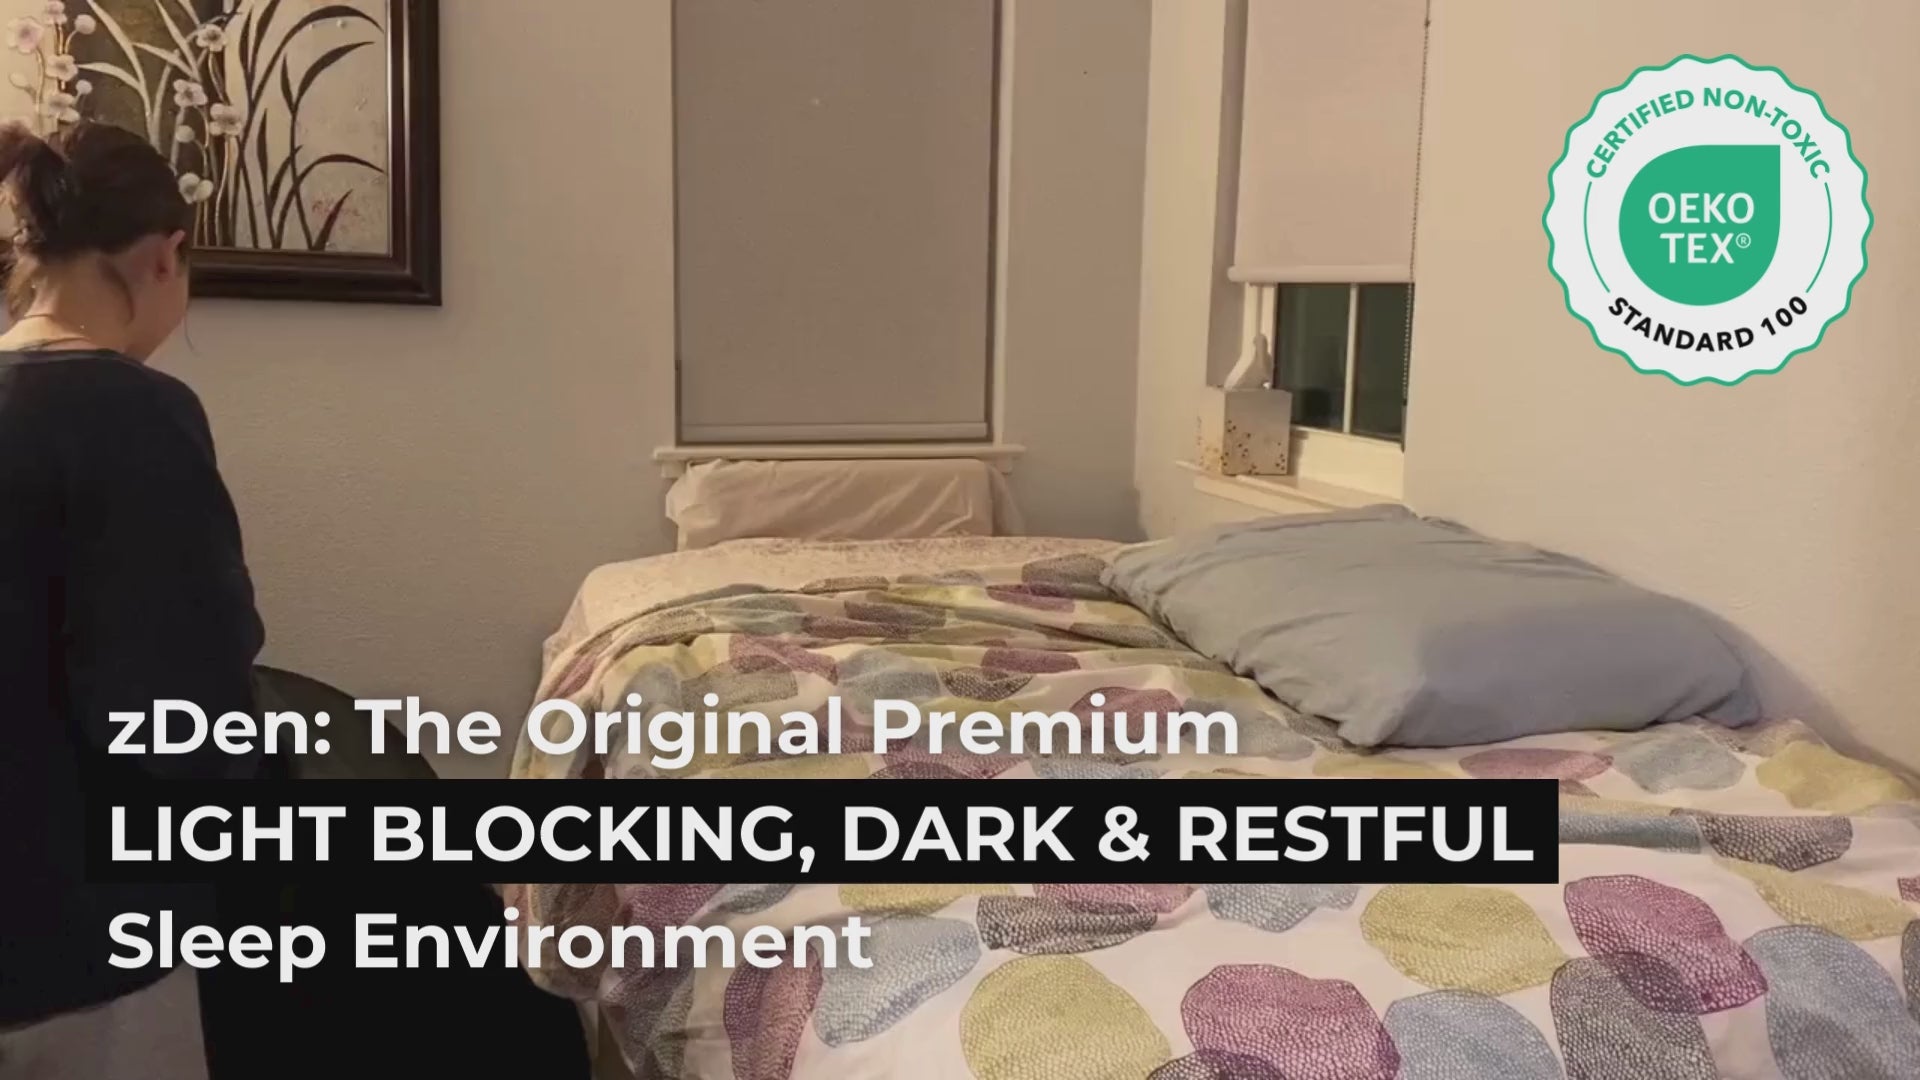 Load video: zDen creates a dark and peaceful sleeping environment to improve your sleep quality. First responders, airline staff, doctors, nurses and more can benefit from quality during shift work hours